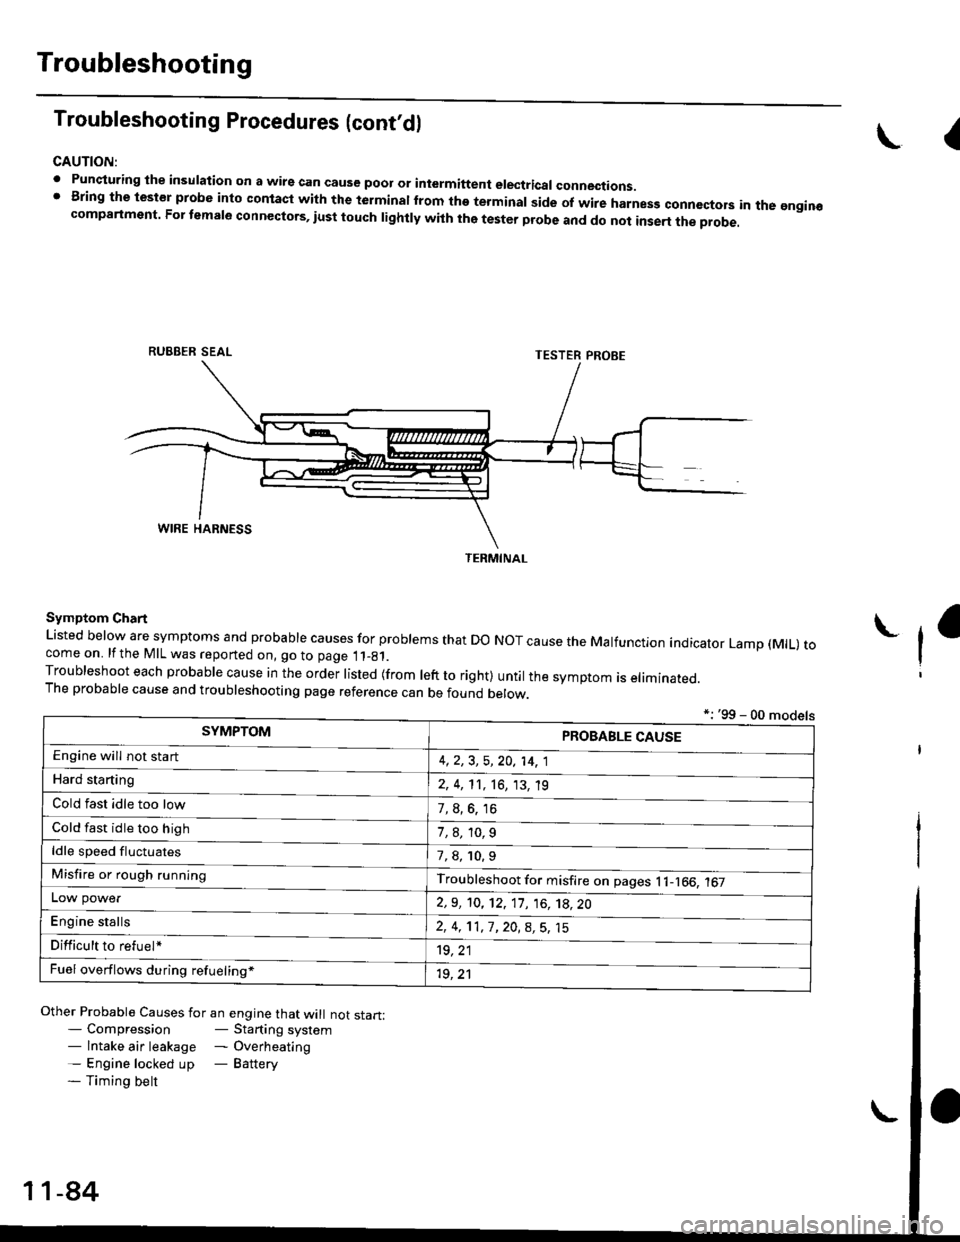 HONDA CIVIC 1996 6.G User Guide Troubleshooting
Troubleshooting Procedures (cont,dl
CAUTION:
. Punqturing ihe insulation on a wirs can cause poor or intermiftent electricar connections.I Bring the test€r probe into contacl with th